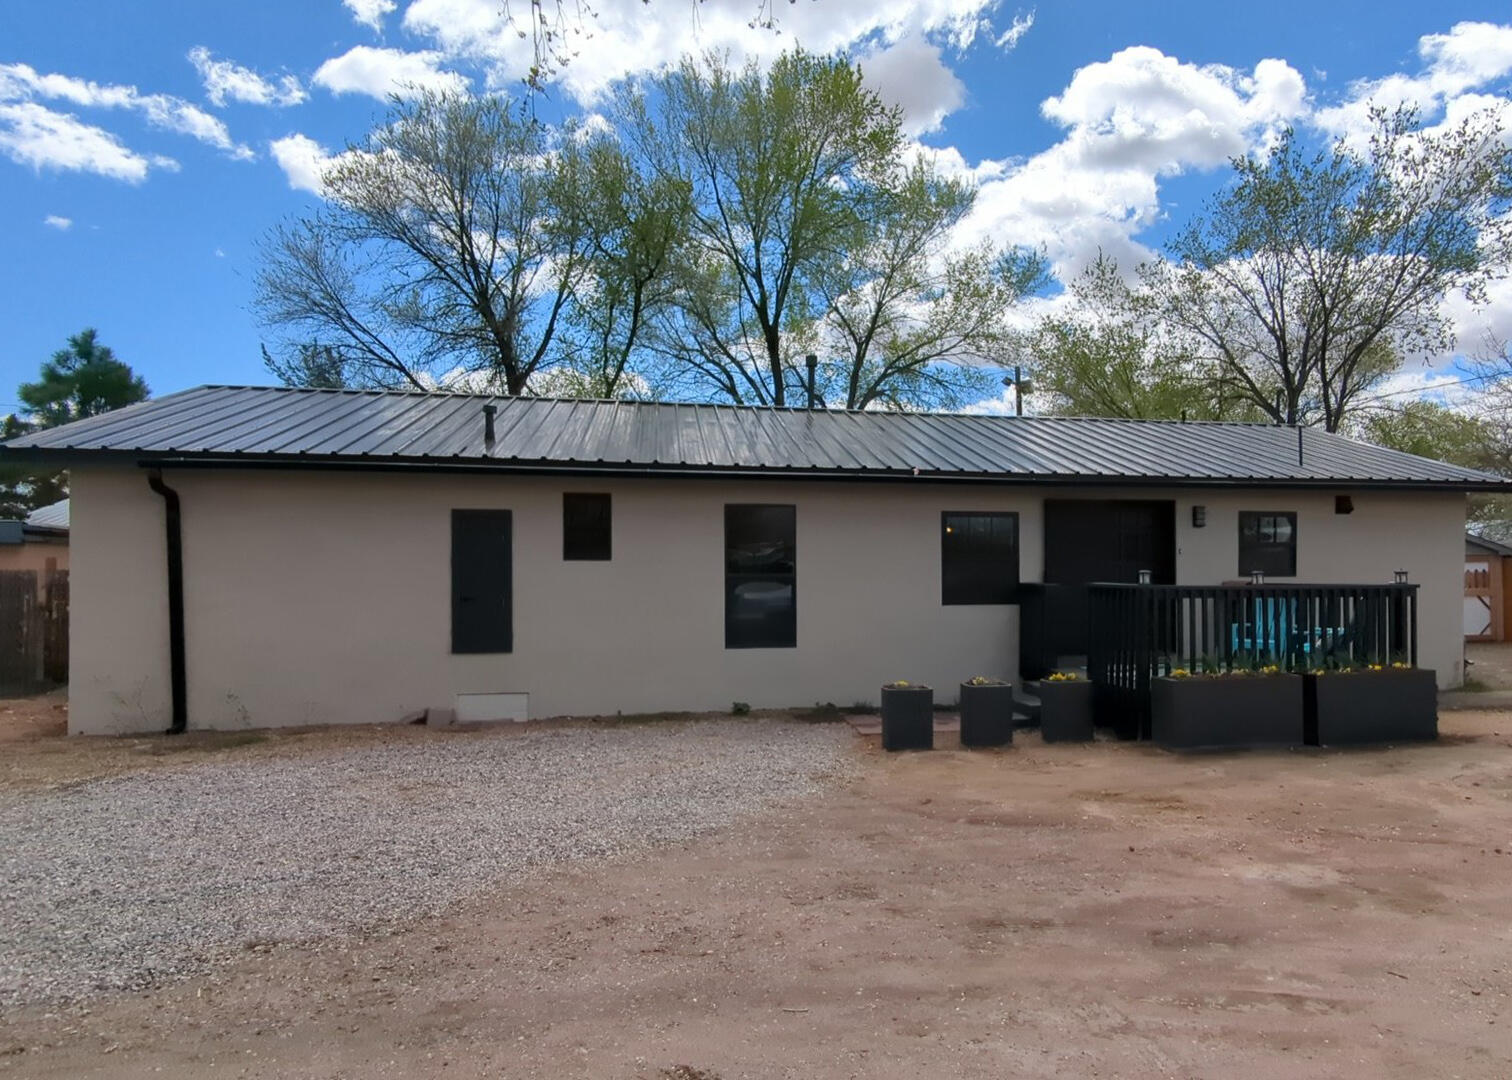 Lender financing available for qualified buyer. Fully remodeled, fresh paint, flooring, bathrooms, windows.  On a private road with a fenced back yard.  Very quiet and calm.  Nice rural neighborhood to walk in.  Close to the Rio Grande and Bachechi open space and the Bosque trail.